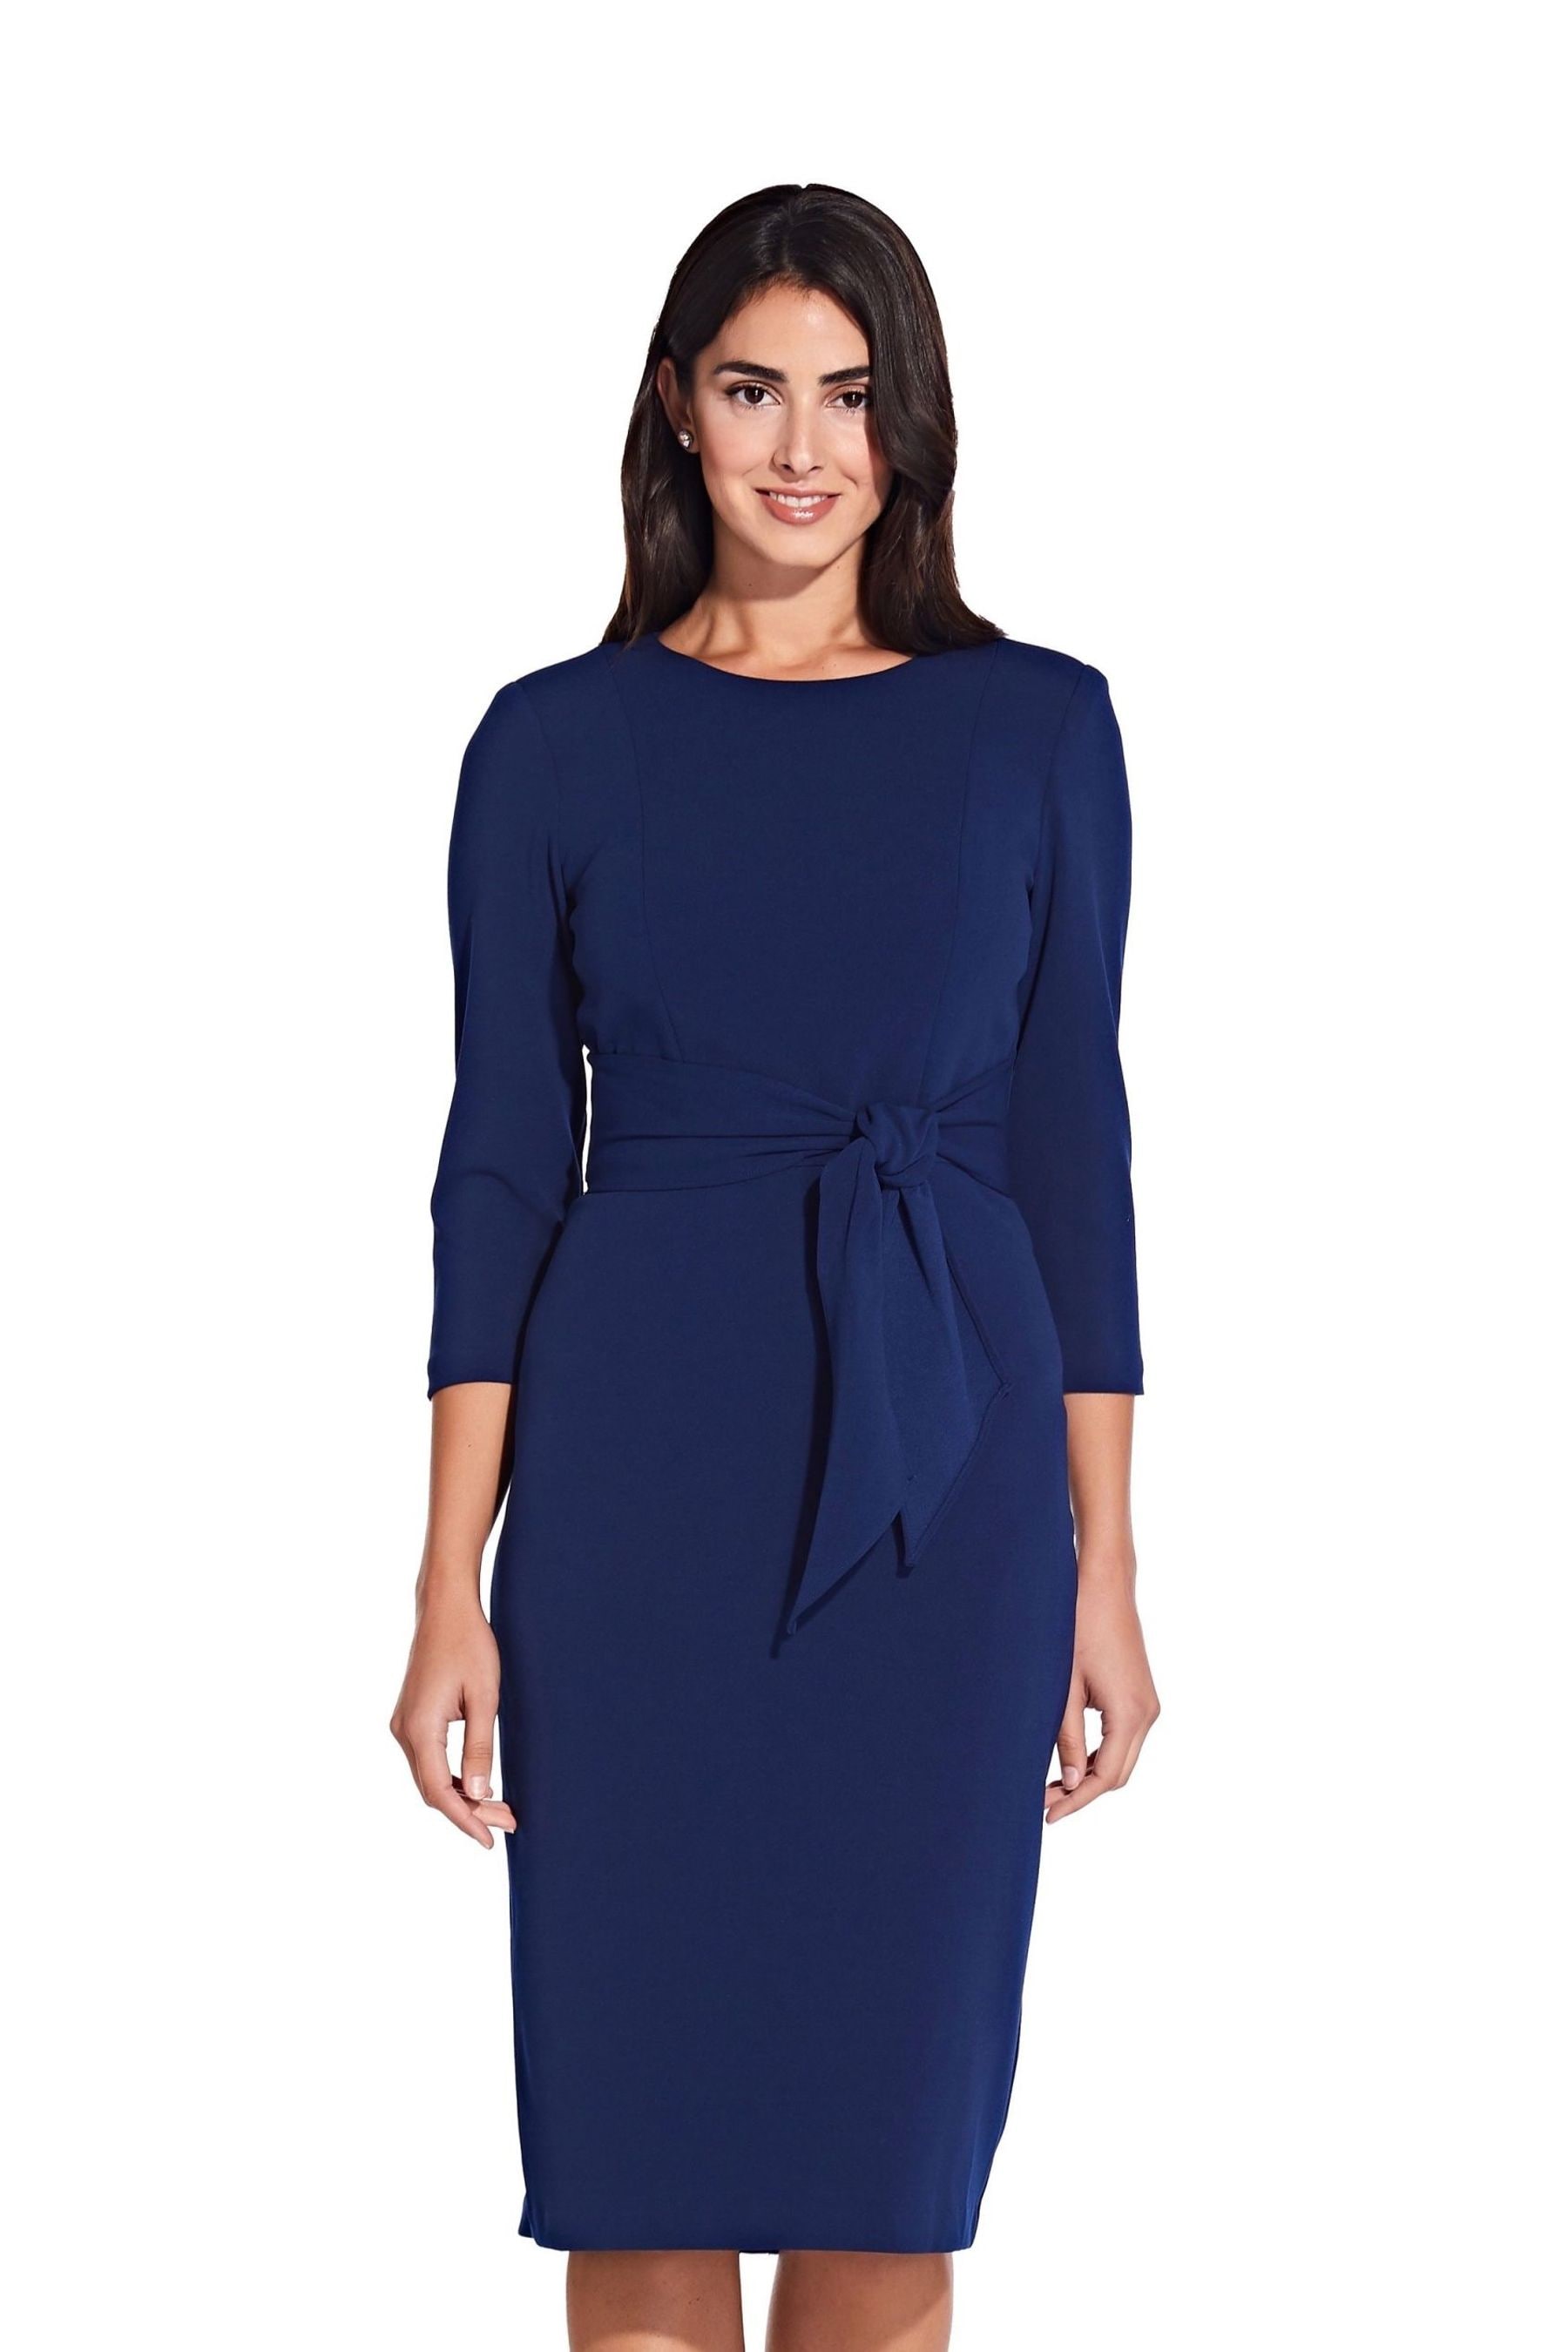 Buy Adrianna Papell Blue Knit Crepe Tie Waist Sheath Dress from the ...